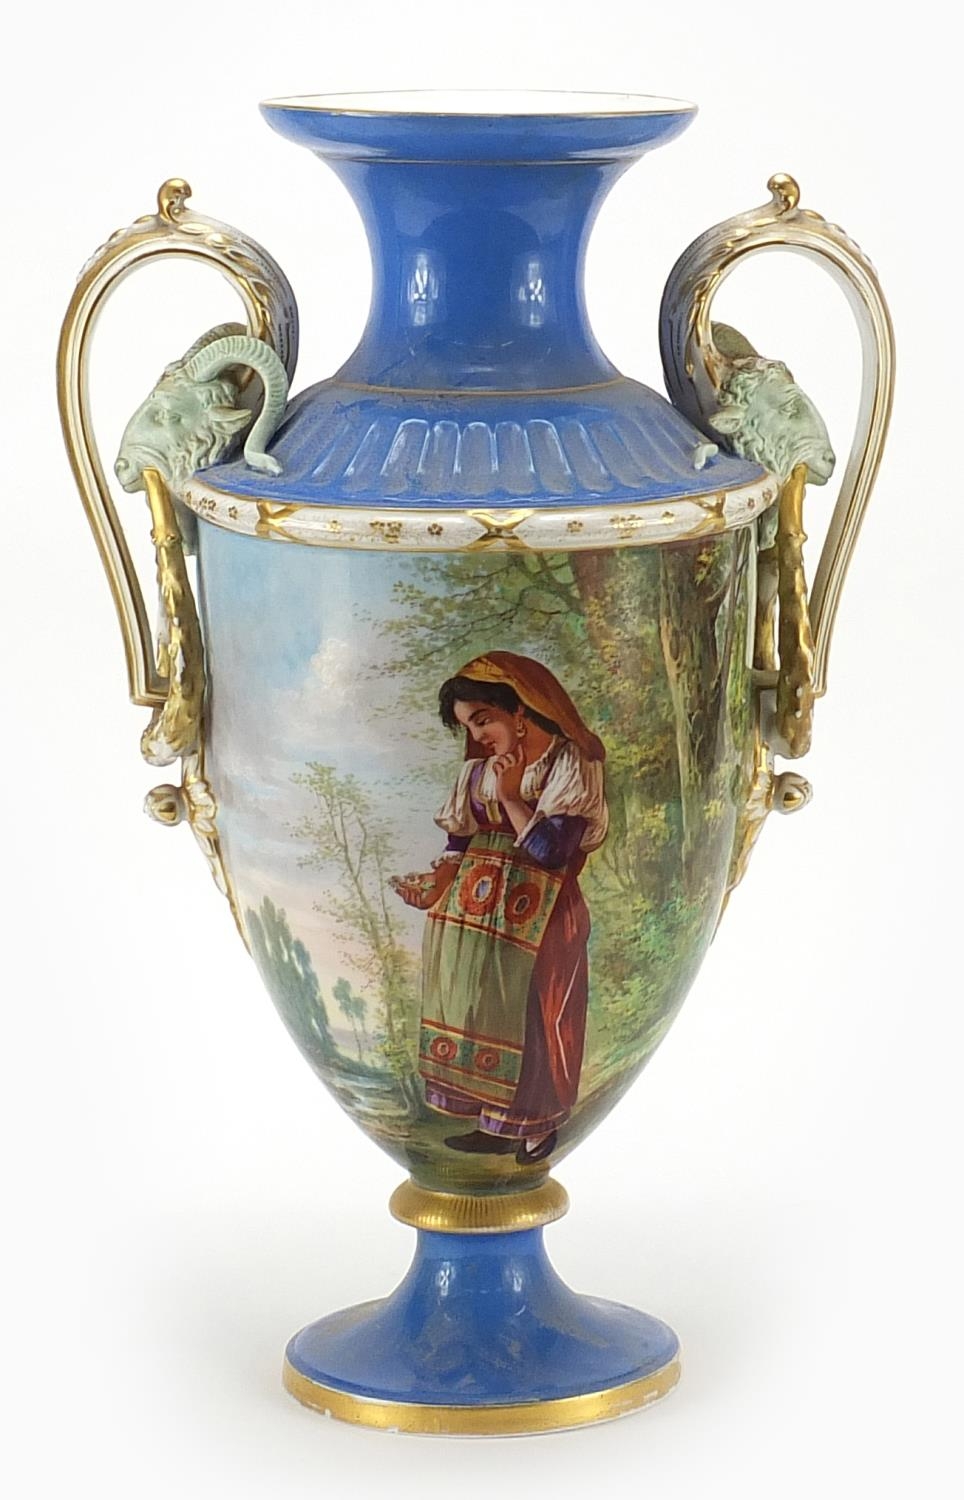 Large 19th century porcelain vase with twin goat head handles, hand painted with a young gypsy